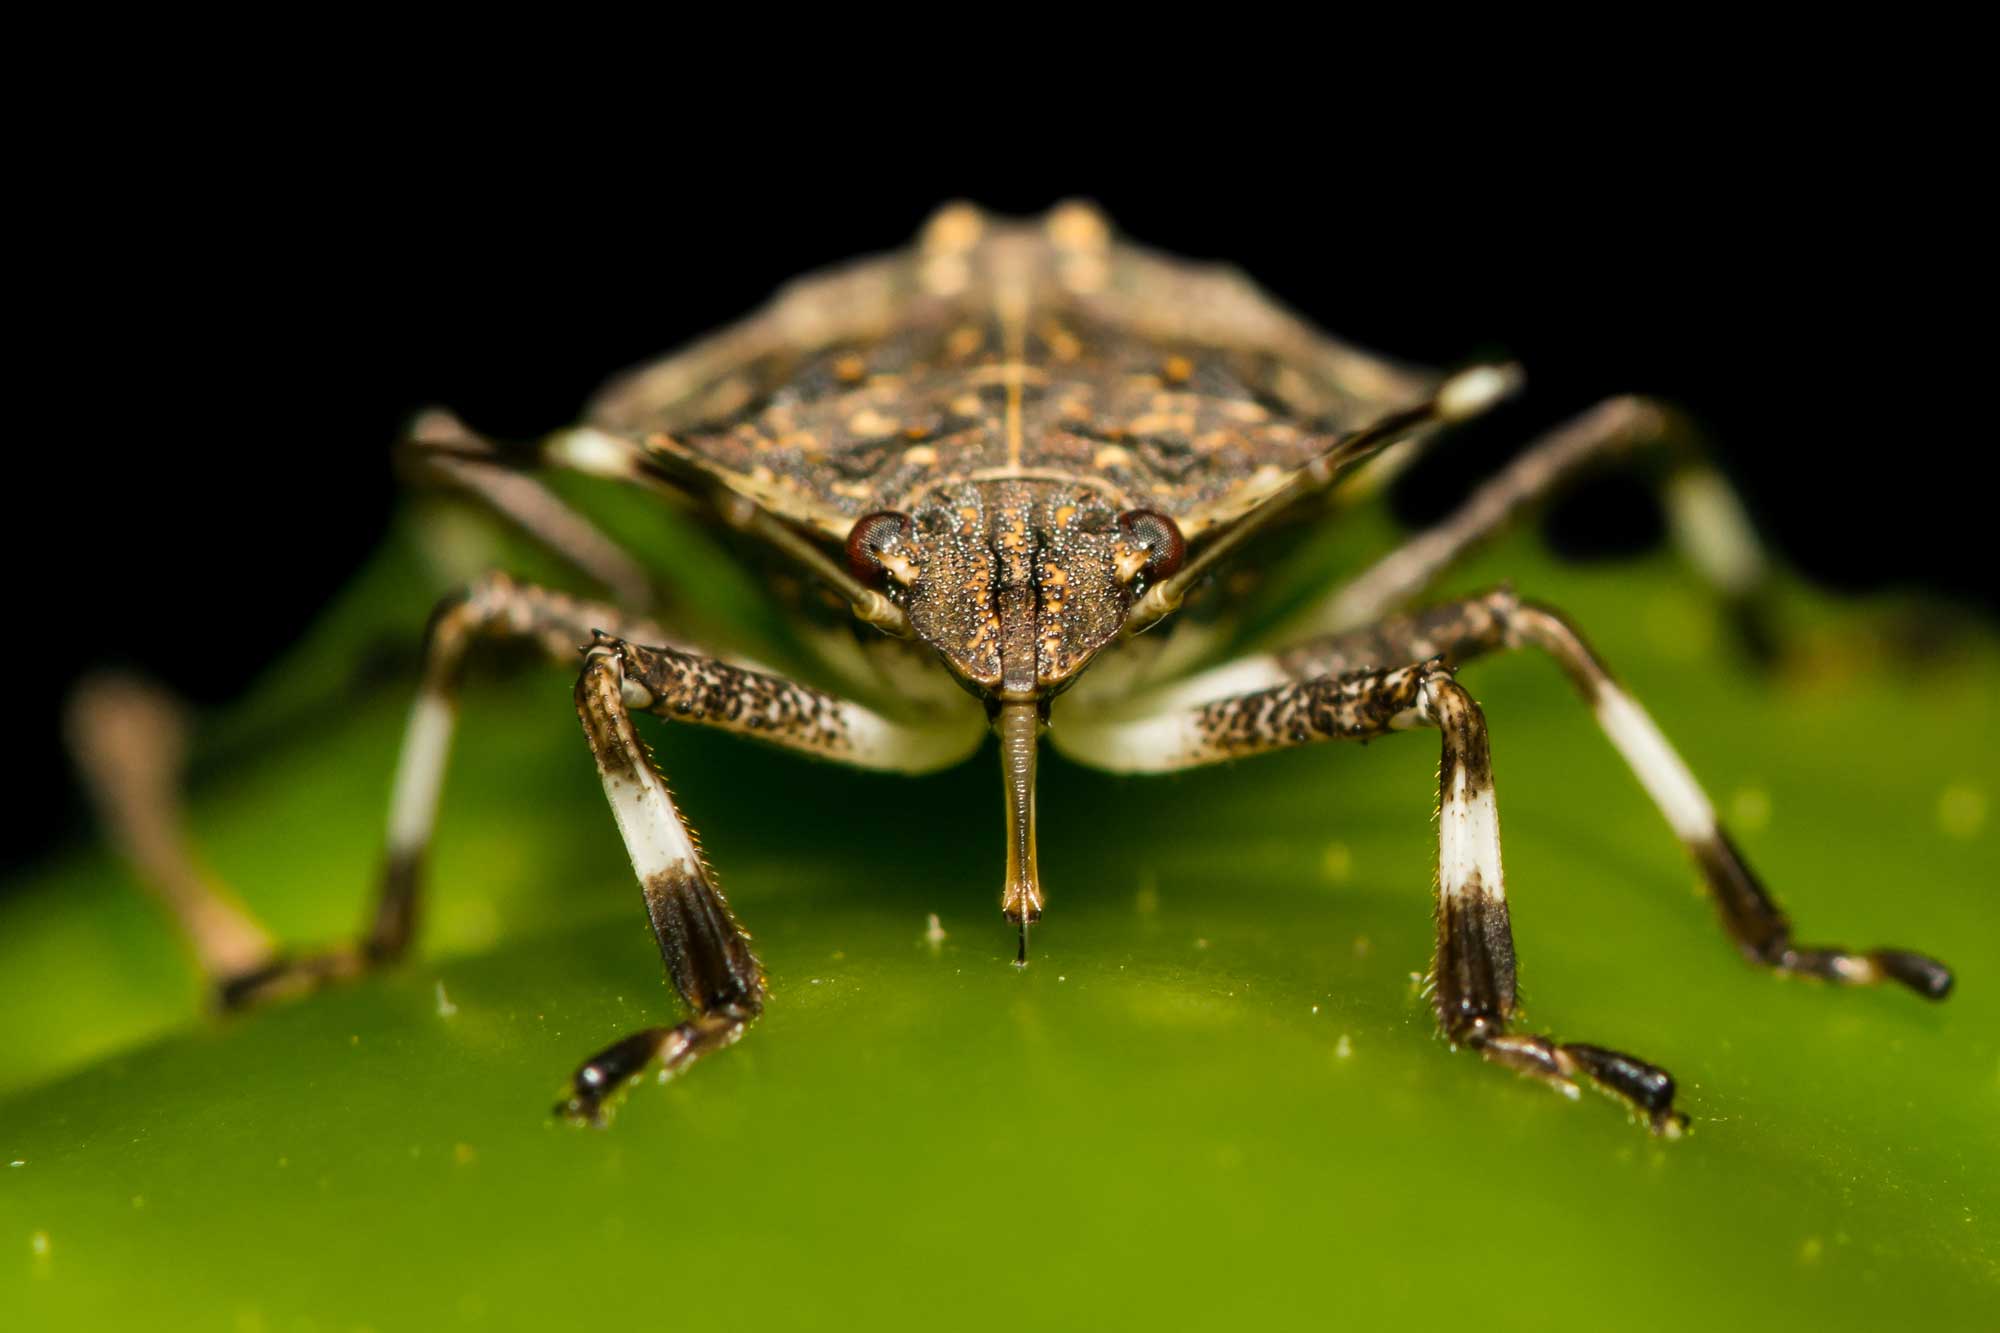  A close up view of a stink bug.